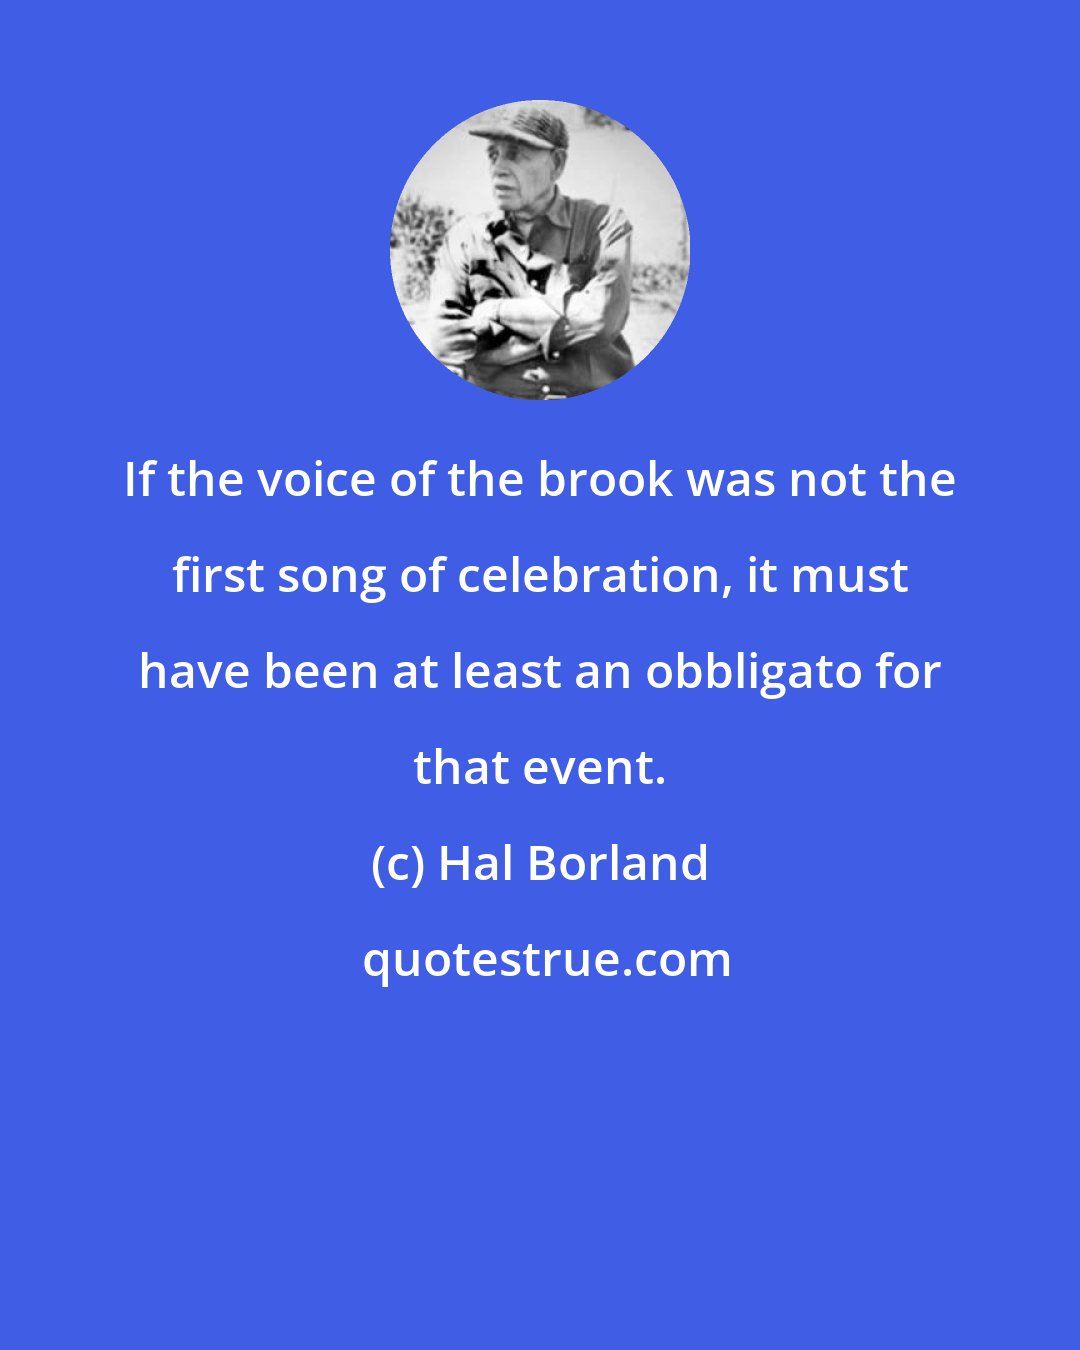 Hal Borland: If the voice of the brook was not the first song of celebration, it must have been at least an obbligato for that event.